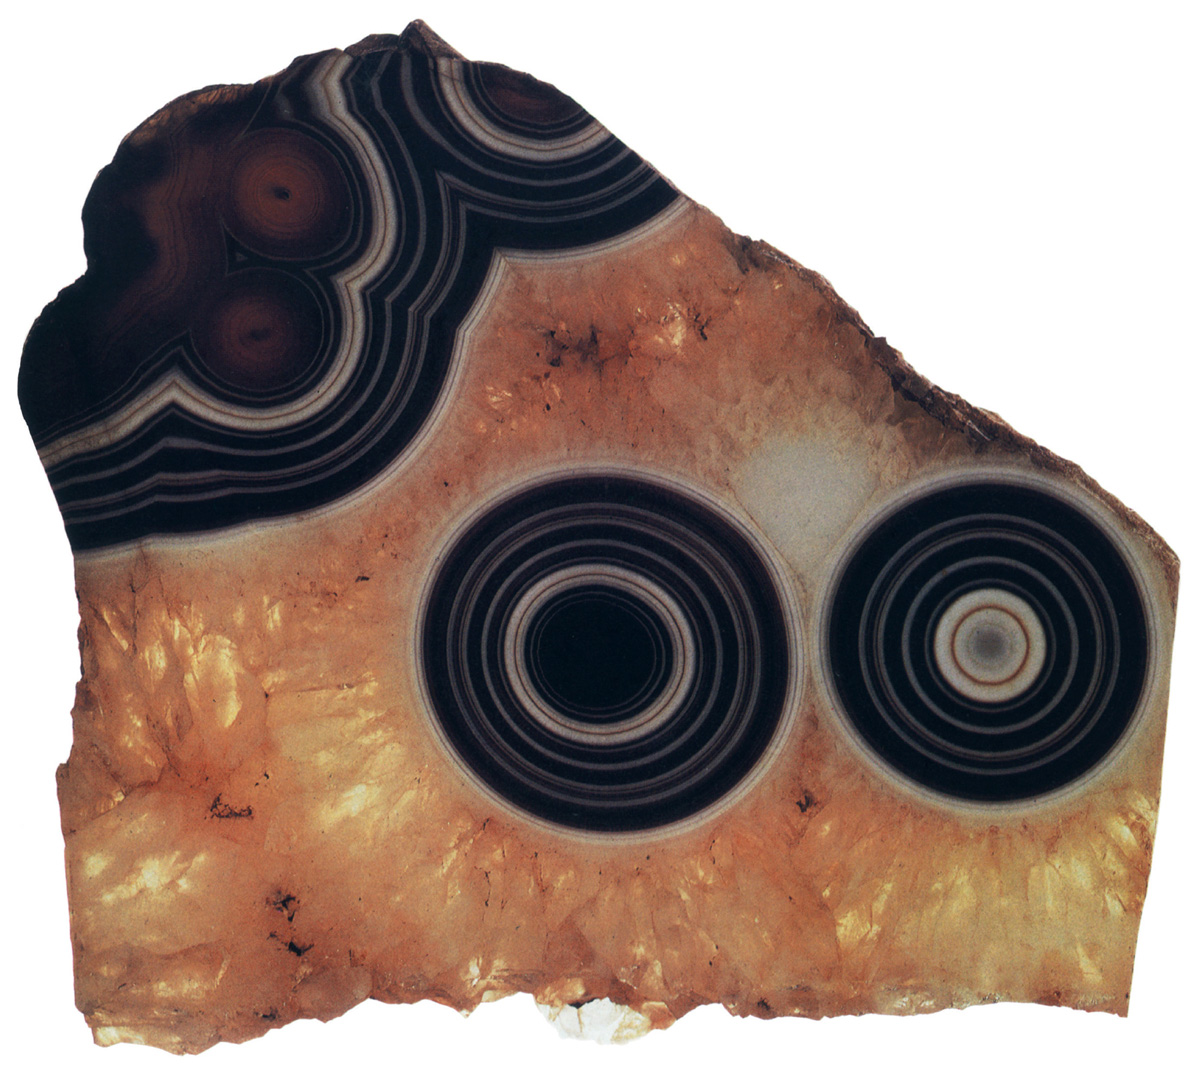 An eye agate from Uruguay from the collection of Roger Caillois.